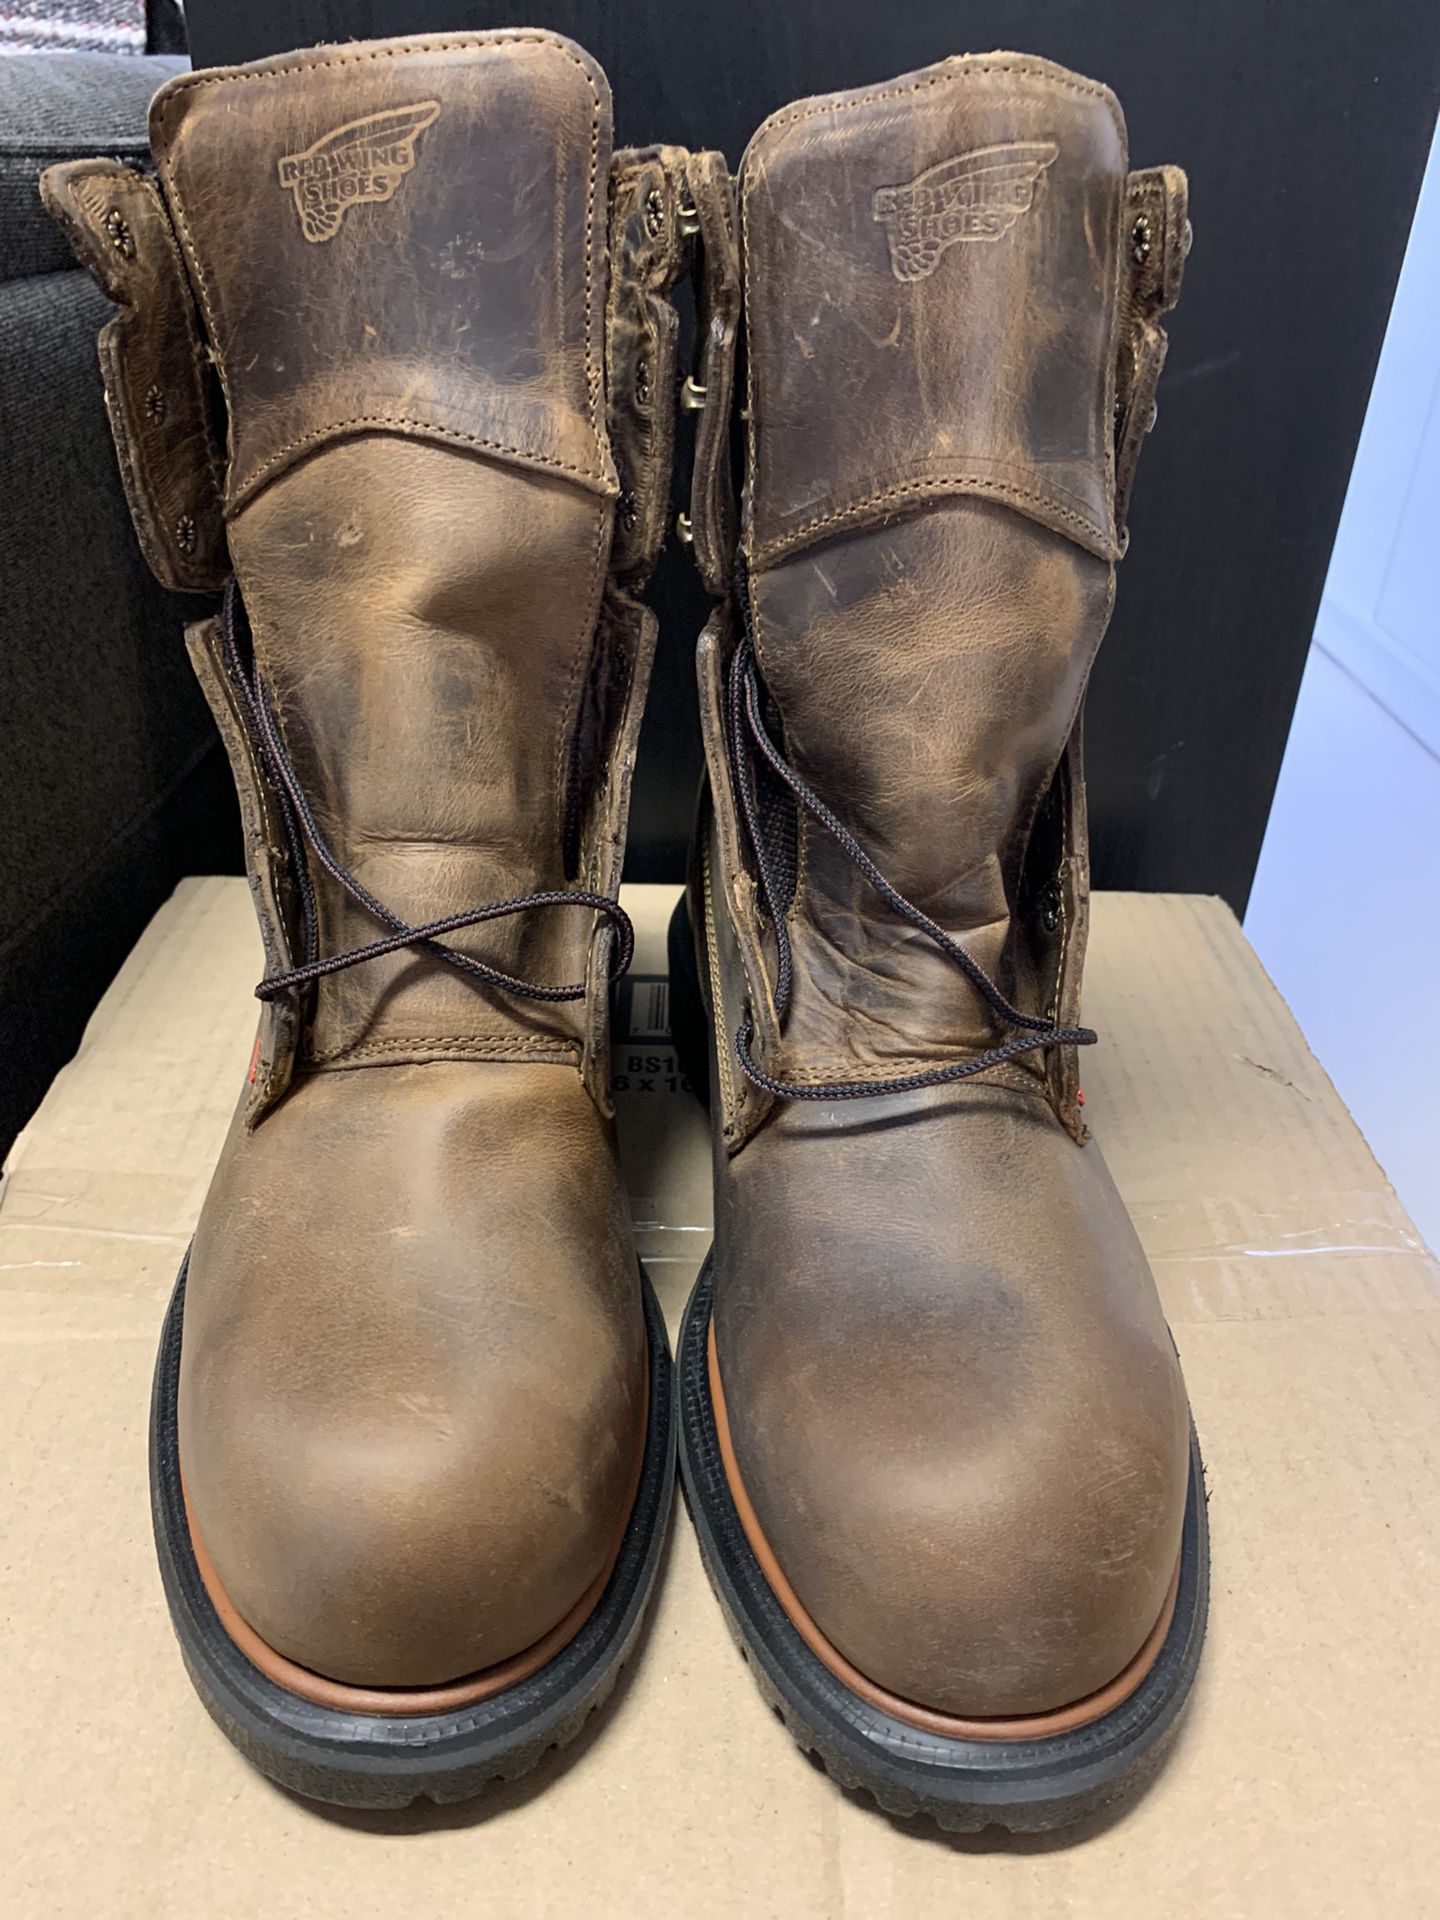 New In-Box Red Wing Dynaforce Leather Workboot Size 11